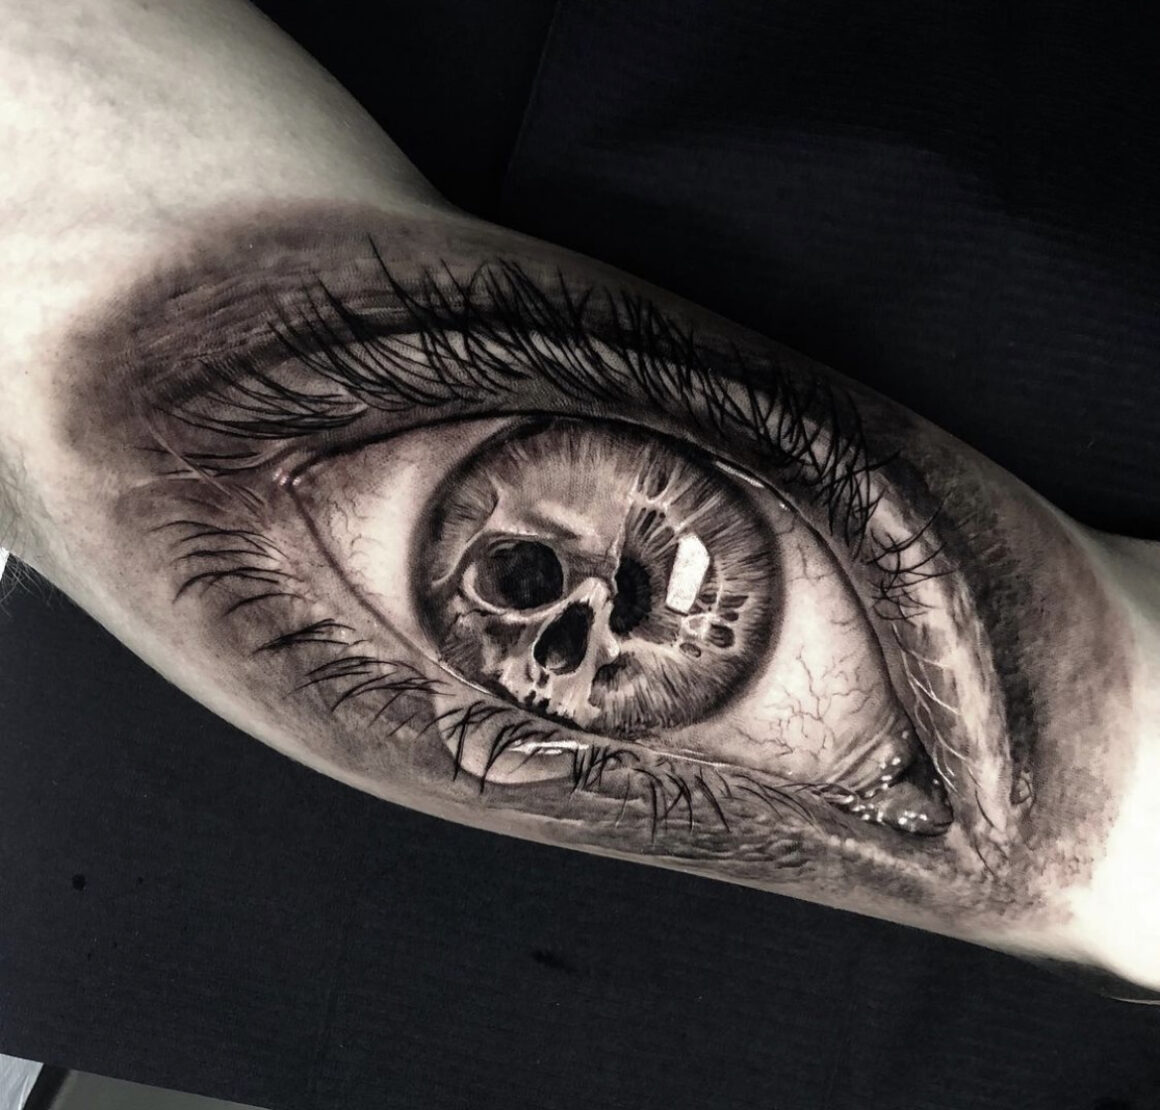 The eye and its expressions in tattoos - Tattoo Life